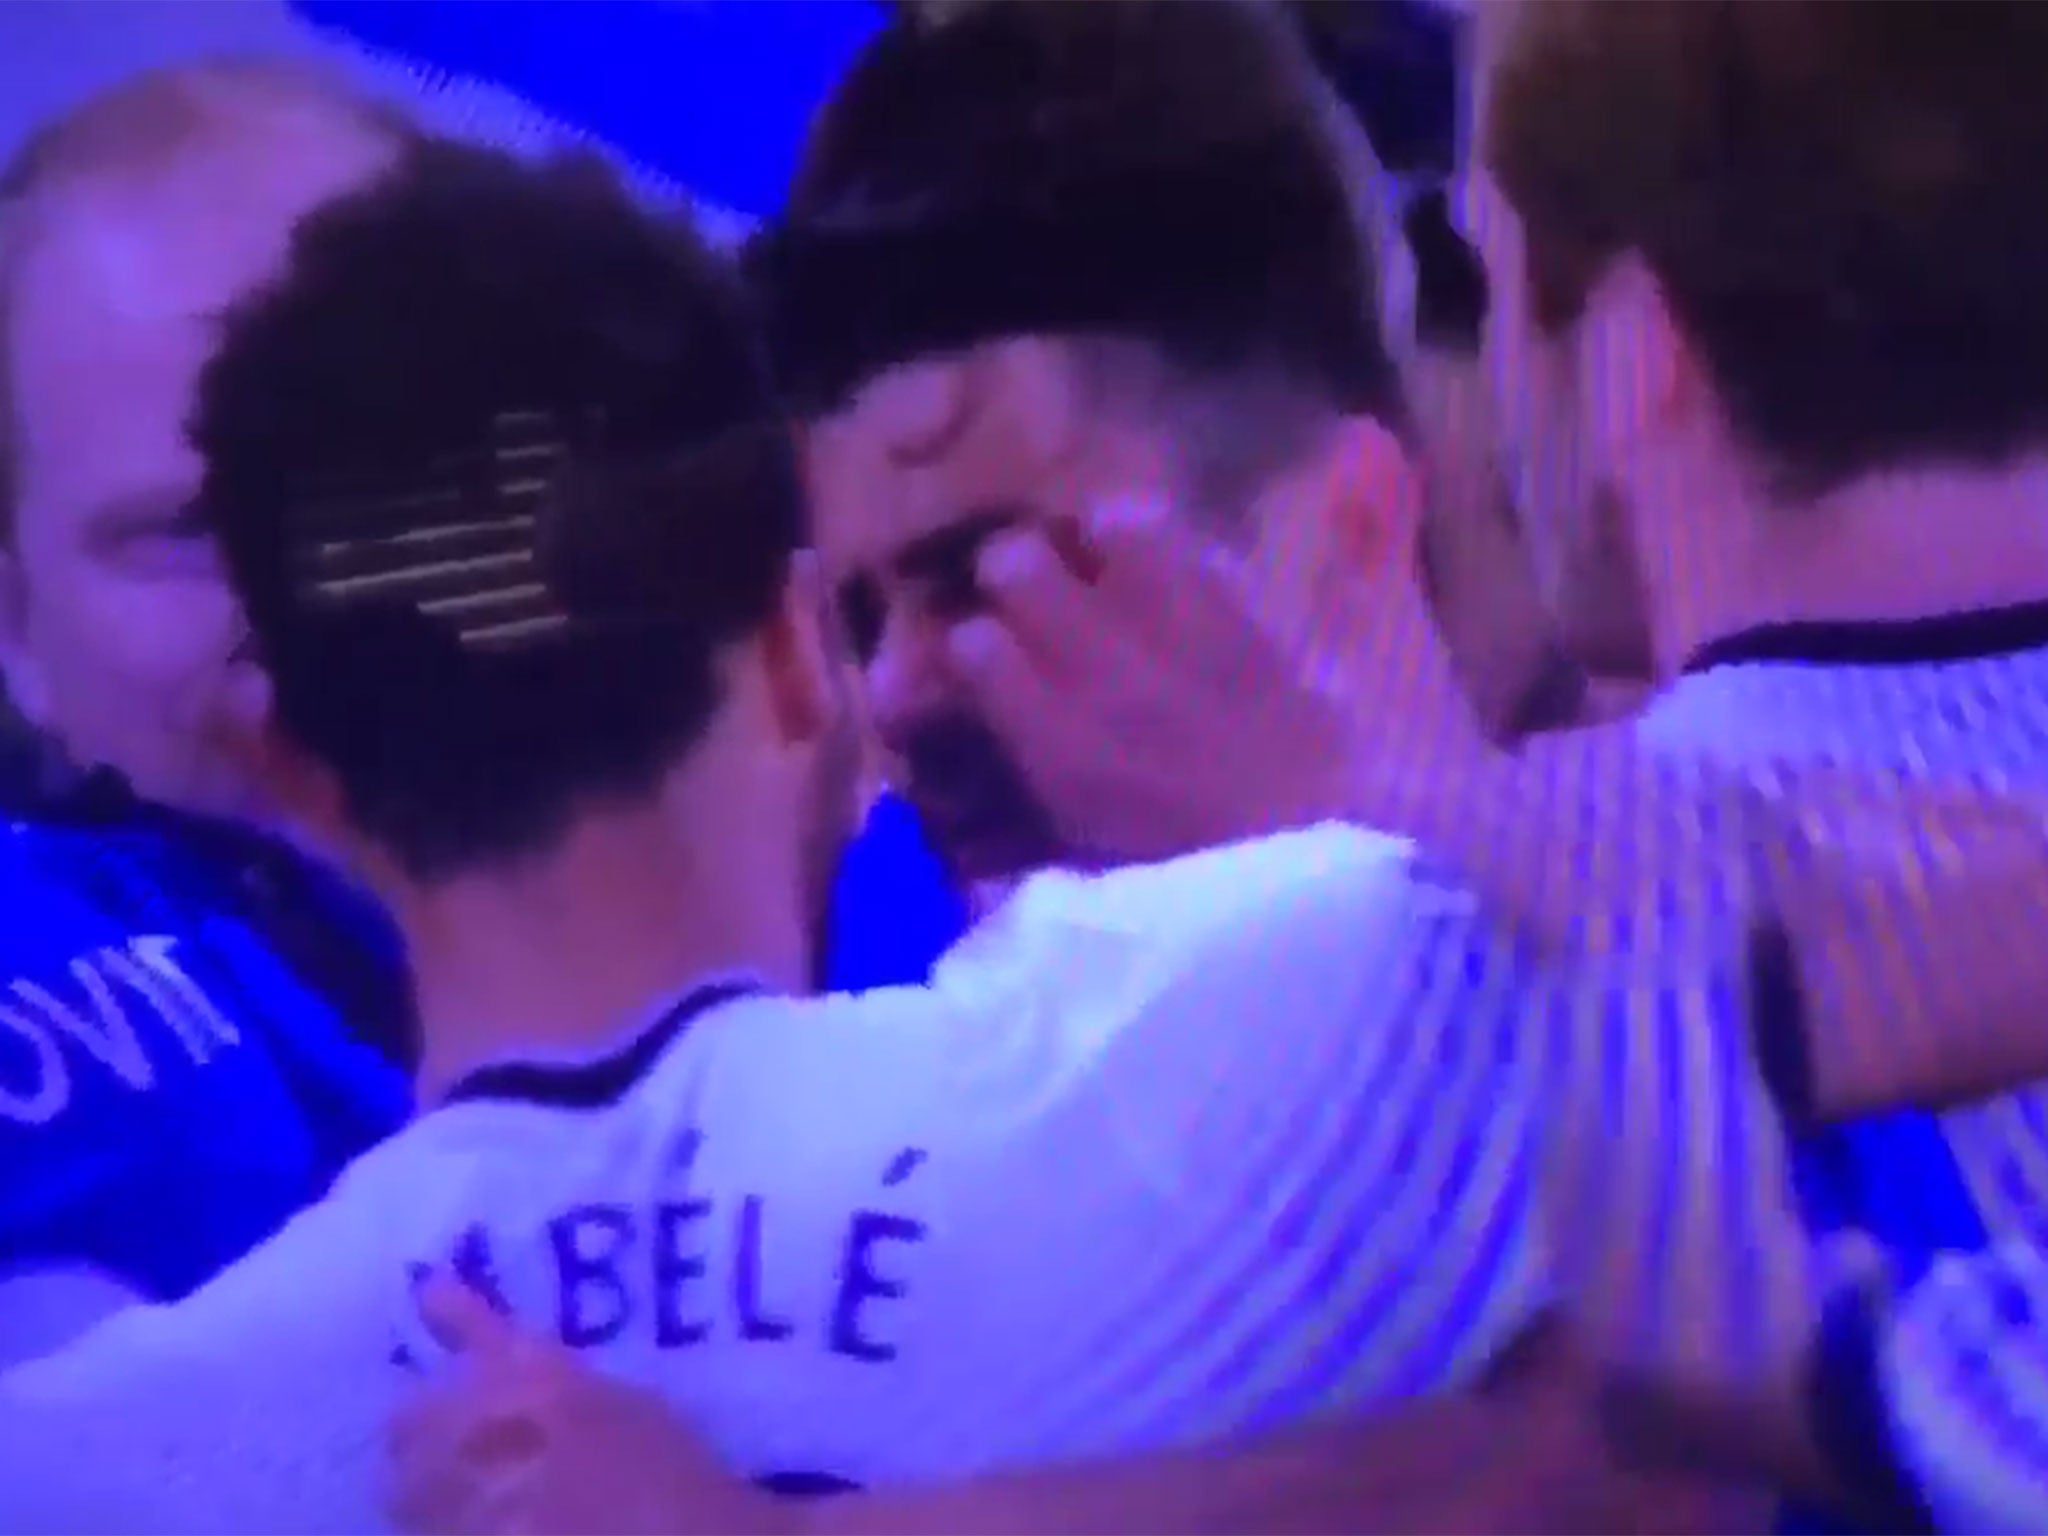 Mousa Dembele puts his fingers in the eye of Diego Costa